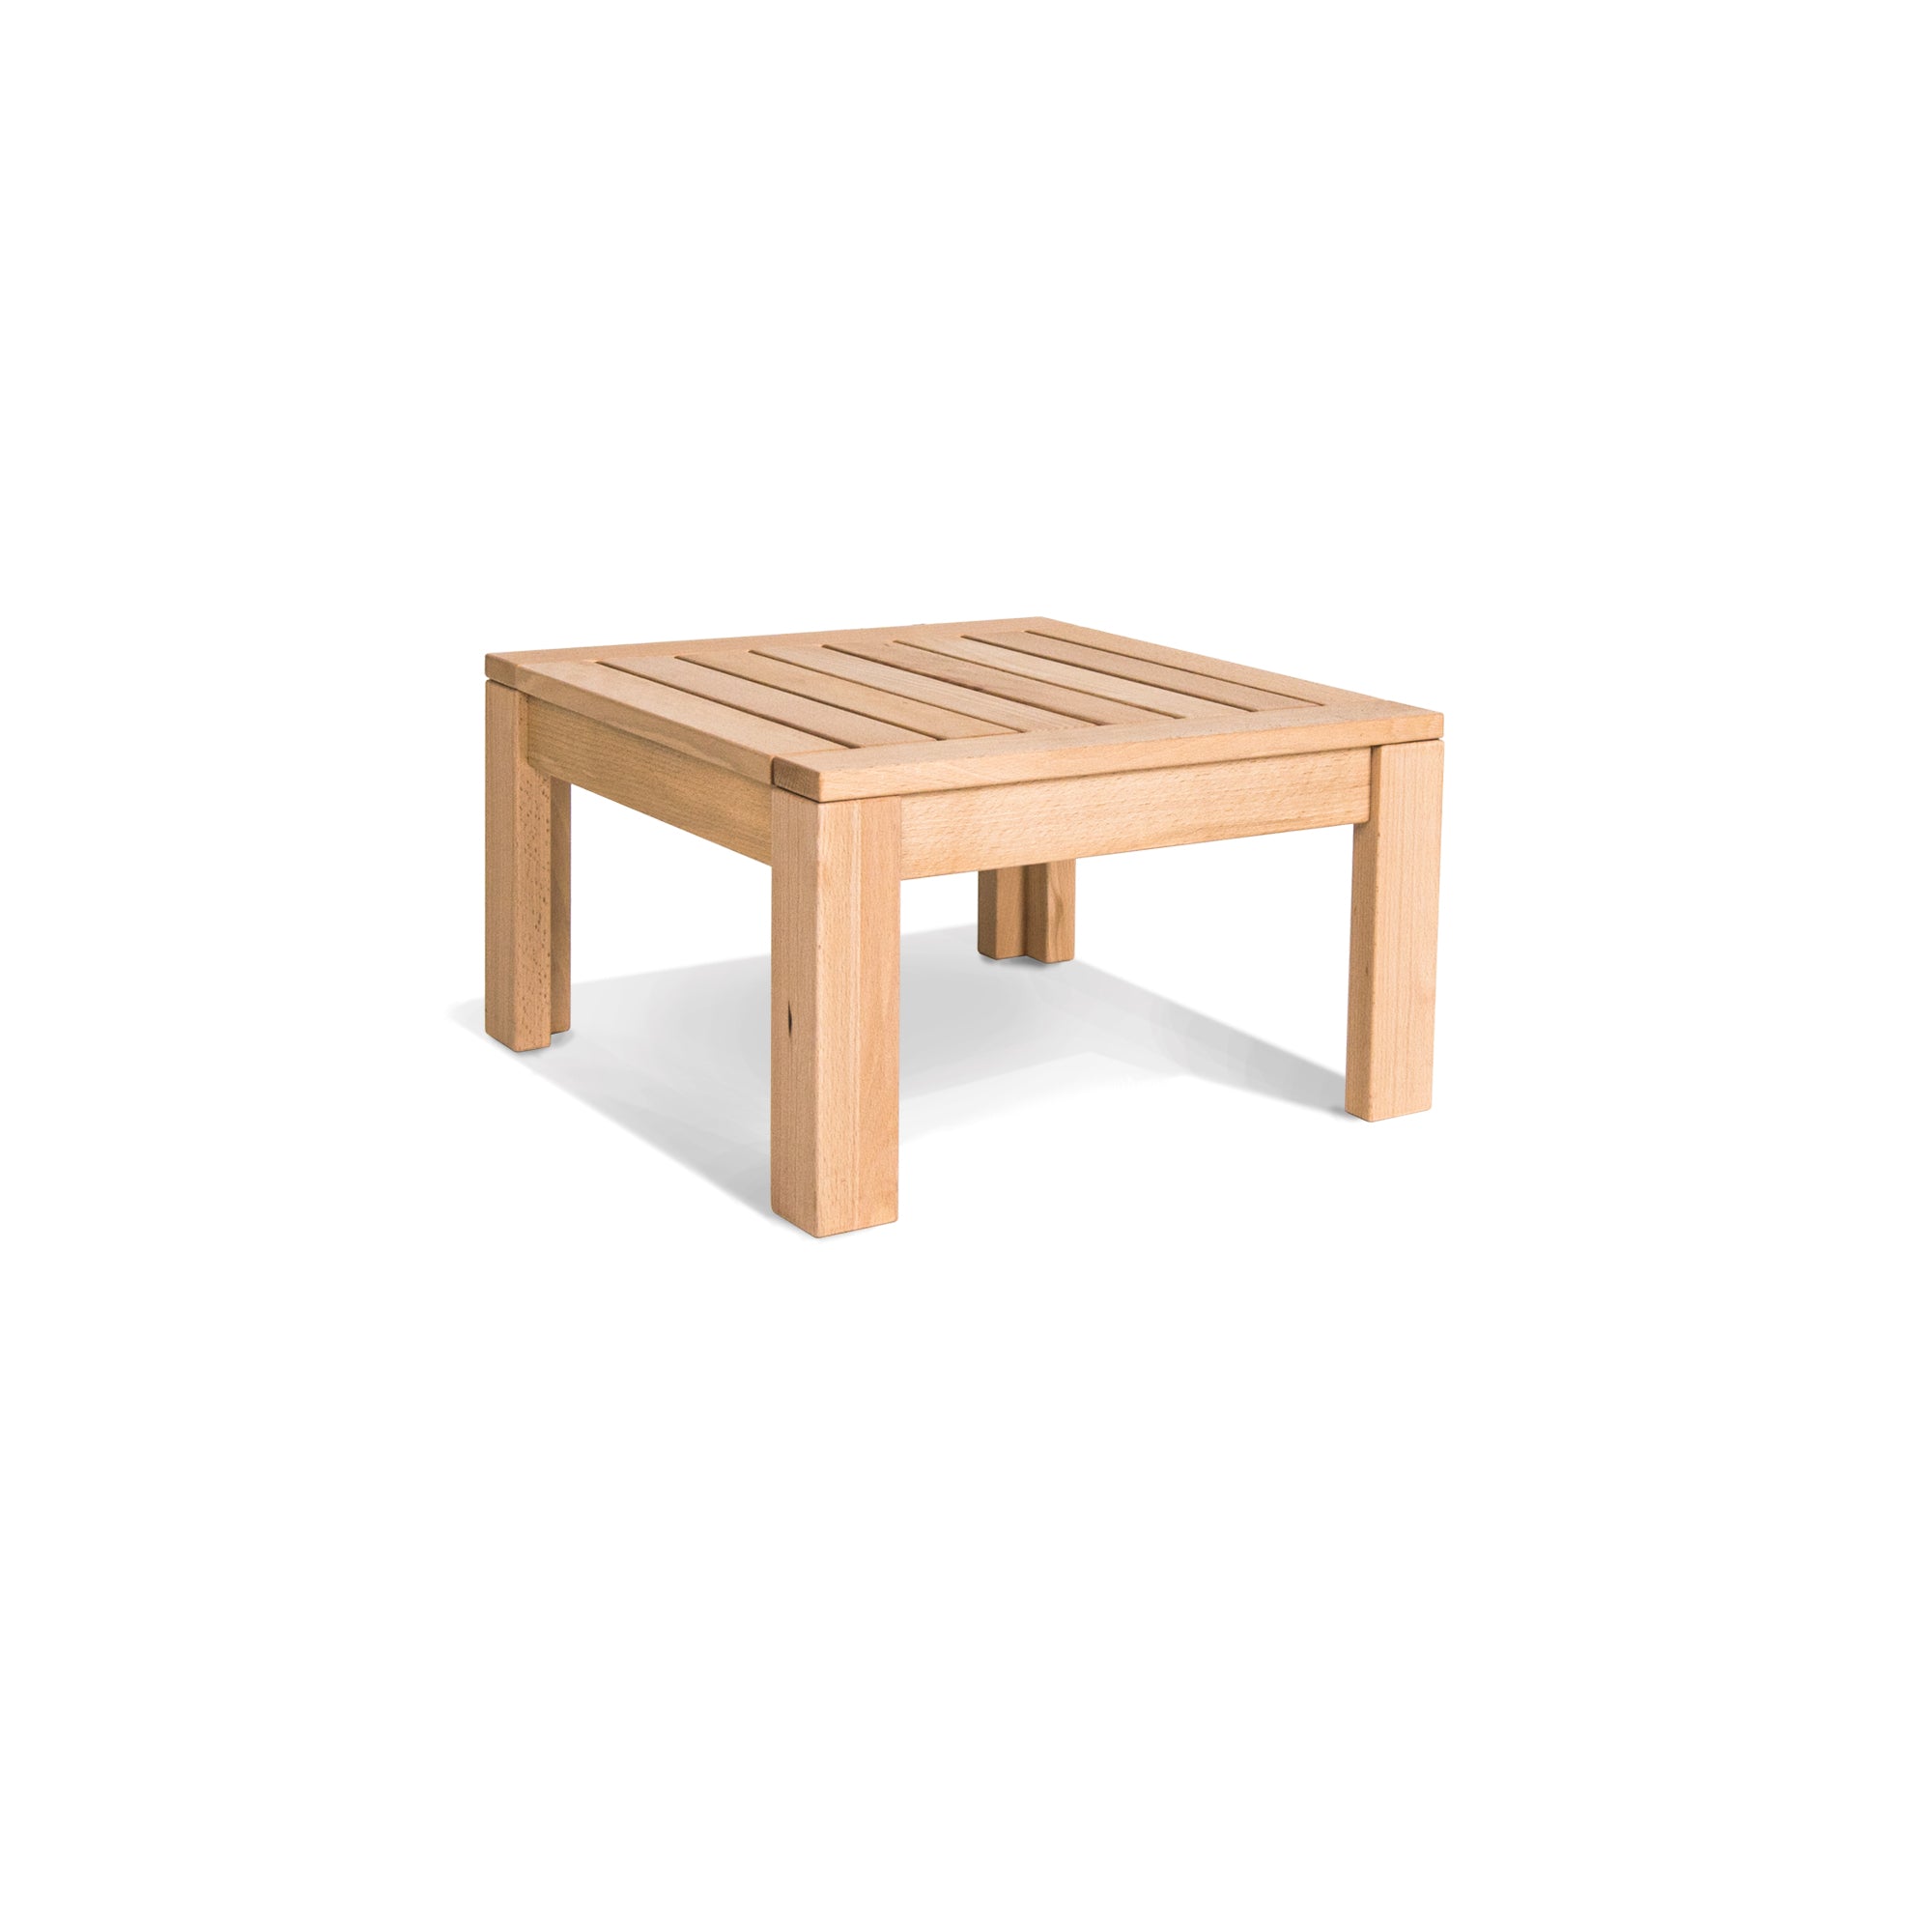 MEXICO Coffee Table-Beech Wood-natural frame colour